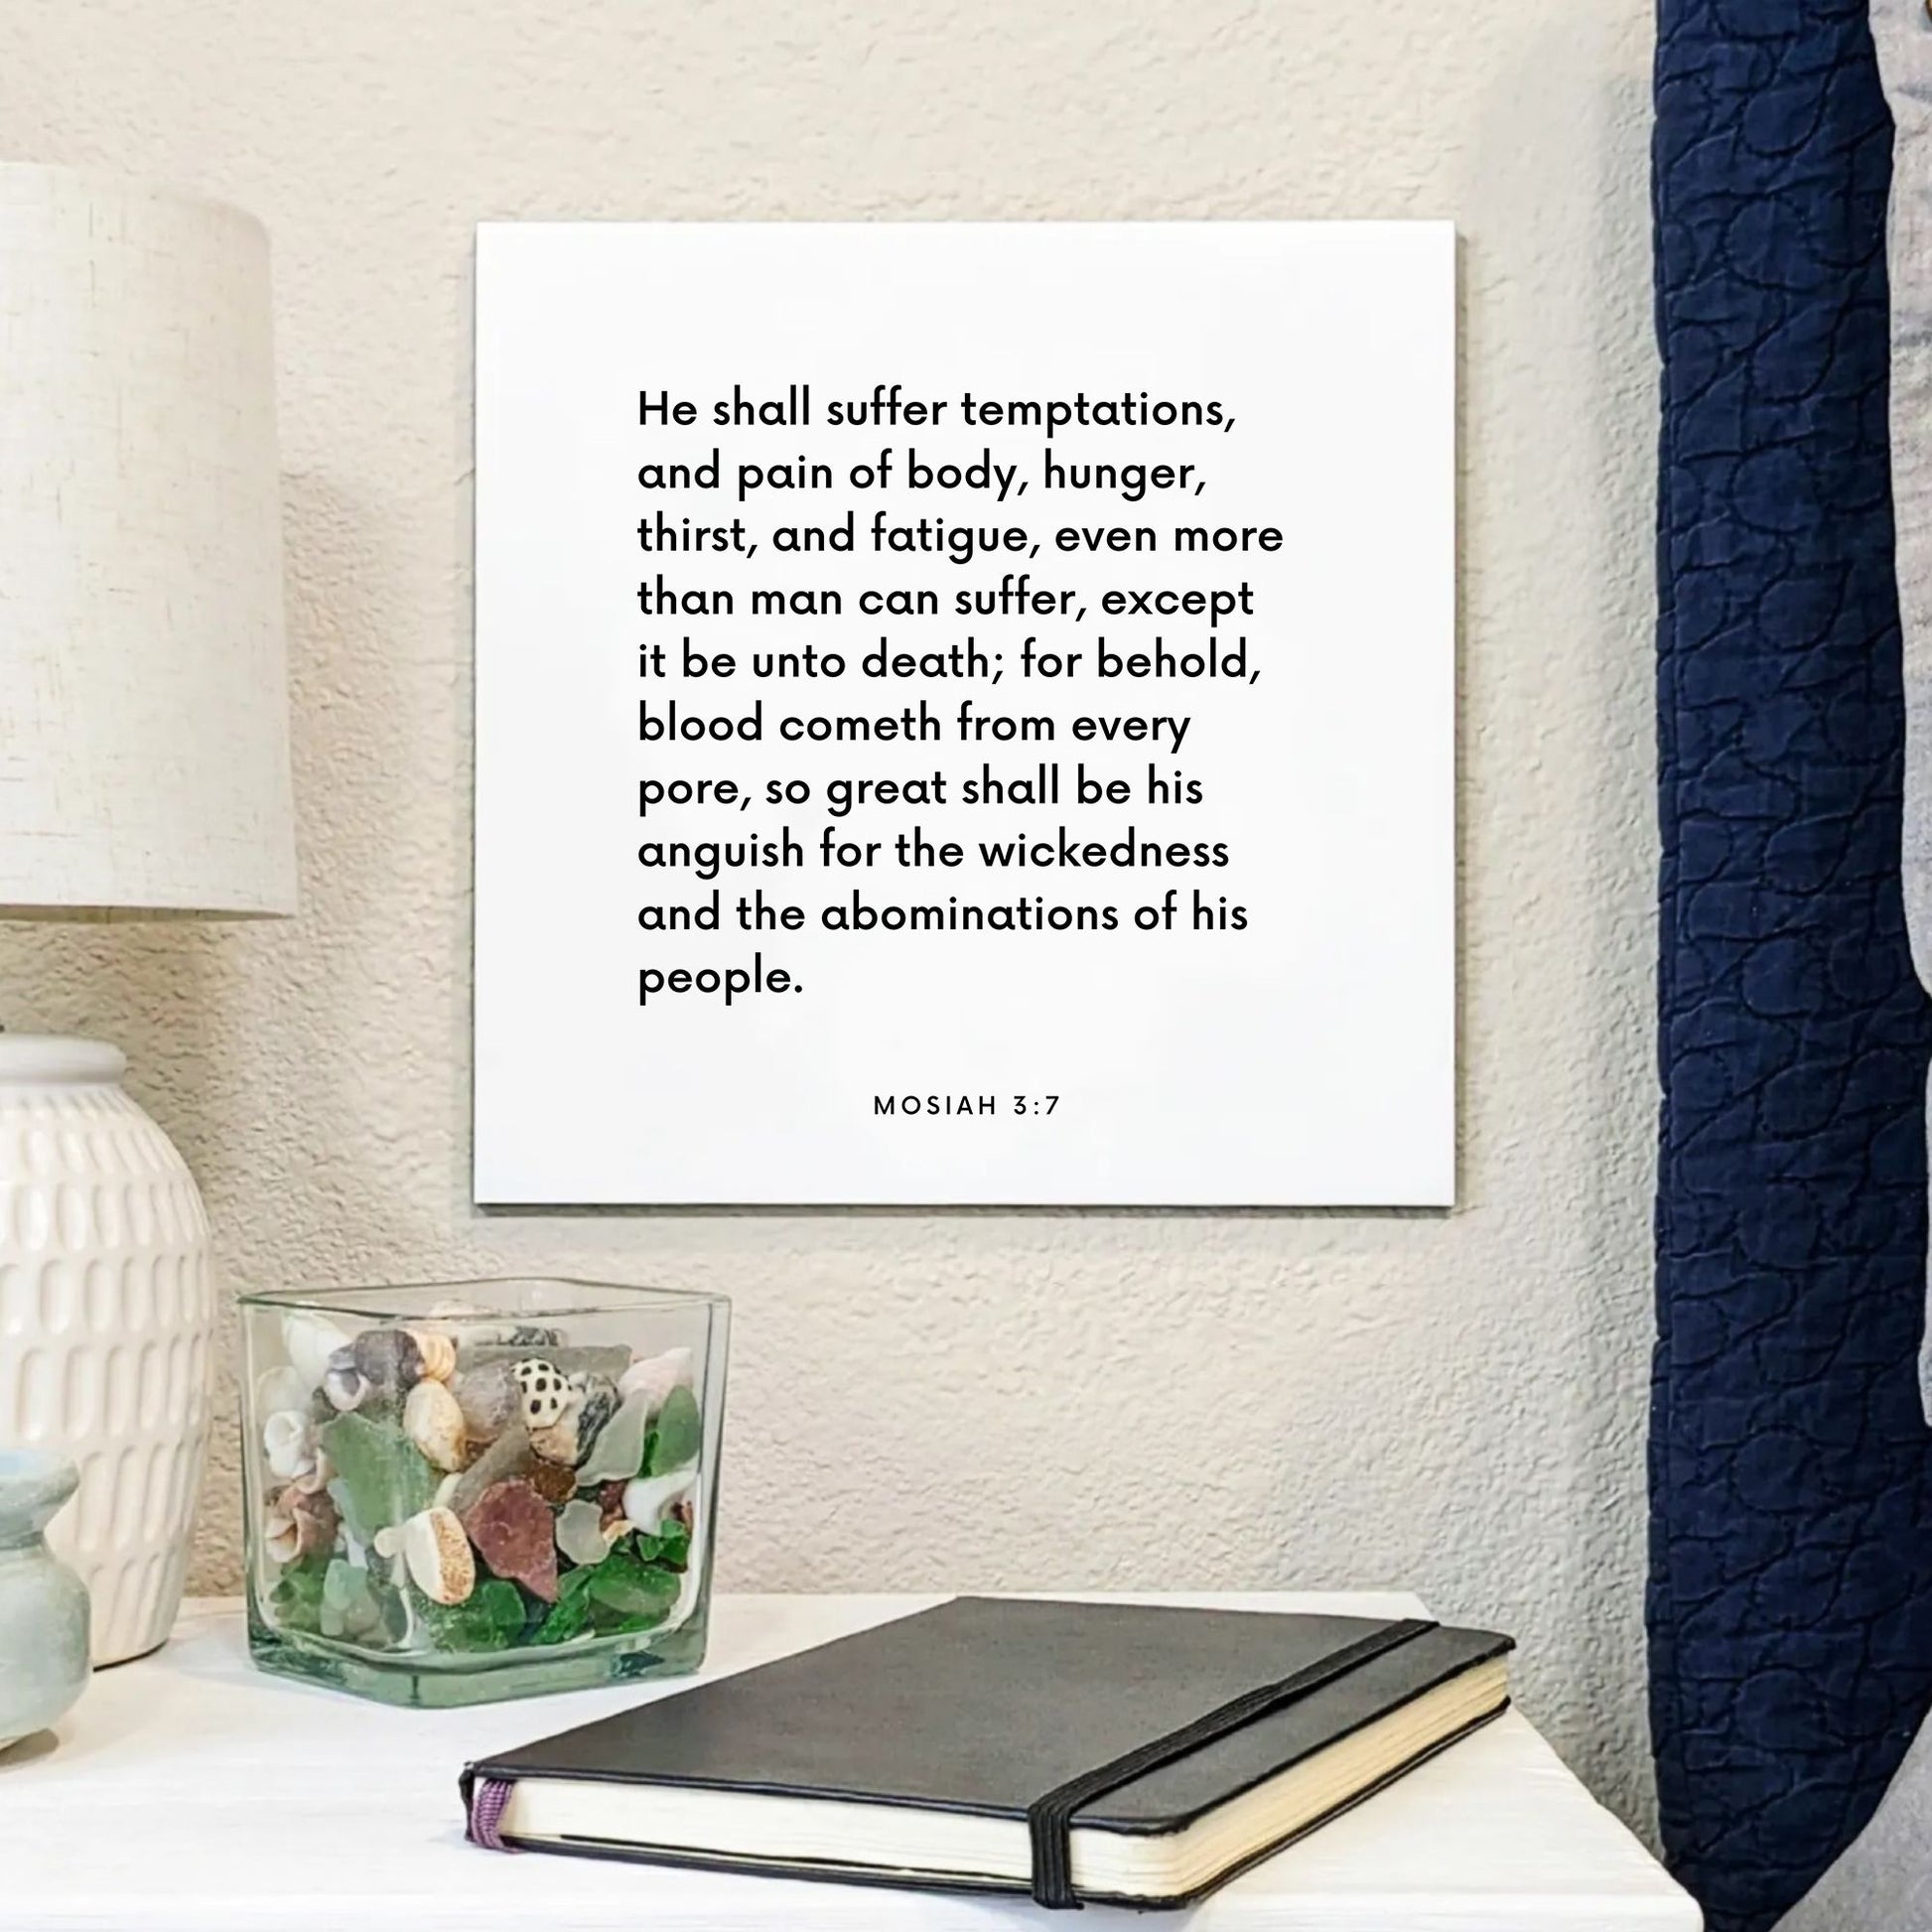 Bedside mouting of the scripture tile for Mosiah 3:7 - "He shall suffer temptations, and pain of body"